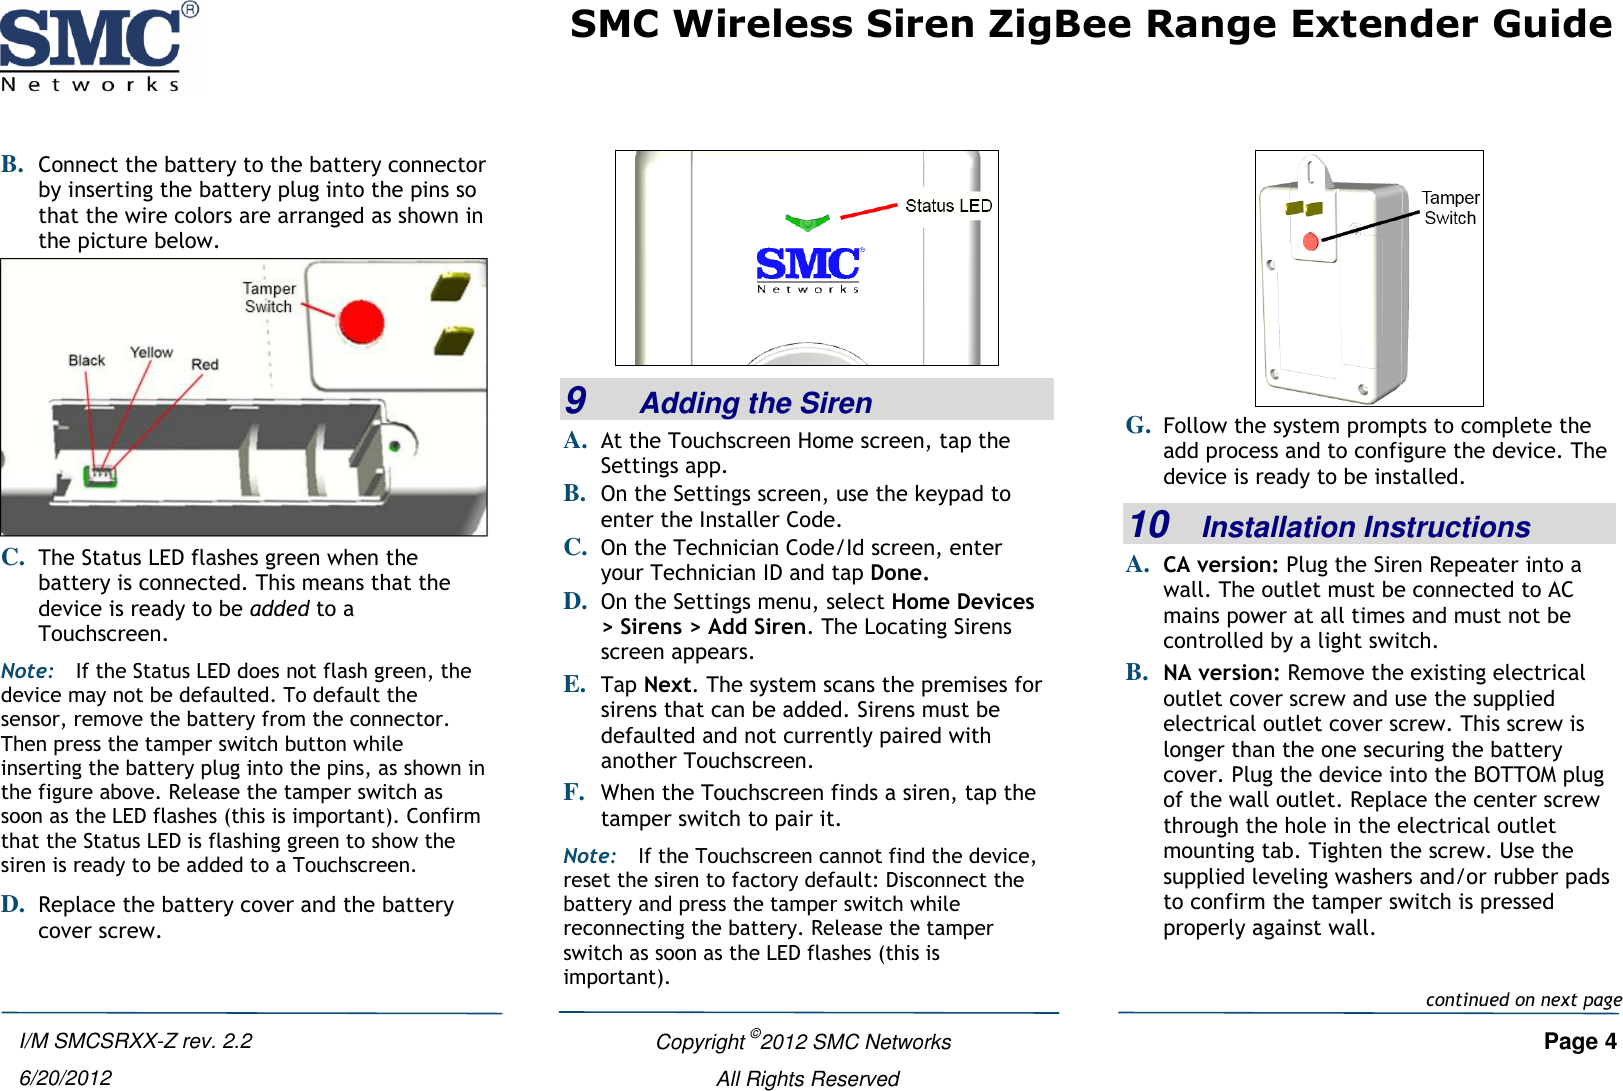 SMC Wireless Siren ZigBee Range Extender Guide   Copyright ©2012 SMC Networks   Page 4 All Rights Reserved I/M SMCSRXX-Z rev. 2.2 6/20/2012 B. Connect the battery to the battery connector by inserting the battery plug into the pins so that the wire colors are arranged as shown in the picture below.  C. The Status LED flashes green when the battery is connected. This means that the device is ready to be added to a Touchscreen. Note: If the Status LED does not flash green, the device may not be defaulted. To default the sensor, remove the battery from the connector. Then press the tamper switch button while inserting the battery plug into the pins, as shown in the figure above. Release the tamper switch as soon as the LED flashes (this is important). Confirm that the Status LED is flashing green to show the siren is ready to be added to a Touchscreen. D. Replace the battery cover and the battery cover screw.  9    Adding the Siren A. At the Touchscreen Home screen, tap the Settings app. B. On the Settings screen, use the keypad to enter the Installer Code.  C. On the Technician Code/Id screen, enter your Technician ID and tap Done. D. On the Settings menu, select Home Devices &gt; Sirens &gt; Add Siren. The Locating Sirens screen appears. E. Tap Next. The system scans the premises for sirens that can be added. Sirens must be defaulted and not currently paired with another Touchscreen.  F. When the Touchscreen finds a siren, tap the tamper switch to pair it. Note: If the Touchscreen cannot find the device, reset the siren to factory default: Disconnect the battery and press the tamper switch while reconnecting the battery. Release the tamper switch as soon as the LED flashes (this is important).  G. Follow the system prompts to complete the add process and to configure the device. The device is ready to be installed. 10   Installation Instructions A. CA version: Plug the Siren Repeater into a wall. The outlet must be connected to AC mains power at all times and must not be controlled by a light switch. B. NA version: Remove the existing electrical outlet cover screw and use the supplied electrical outlet cover screw. This screw is longer than the one securing the battery cover. Plug the device into the BOTTOM plug of the wall outlet. Replace the center screw through the hole in the electrical outlet mounting tab. Tighten the screw. Use the supplied leveling washers and/or rubber pads to confirm the tamper switch is pressed properly against wall.  continued on next page 